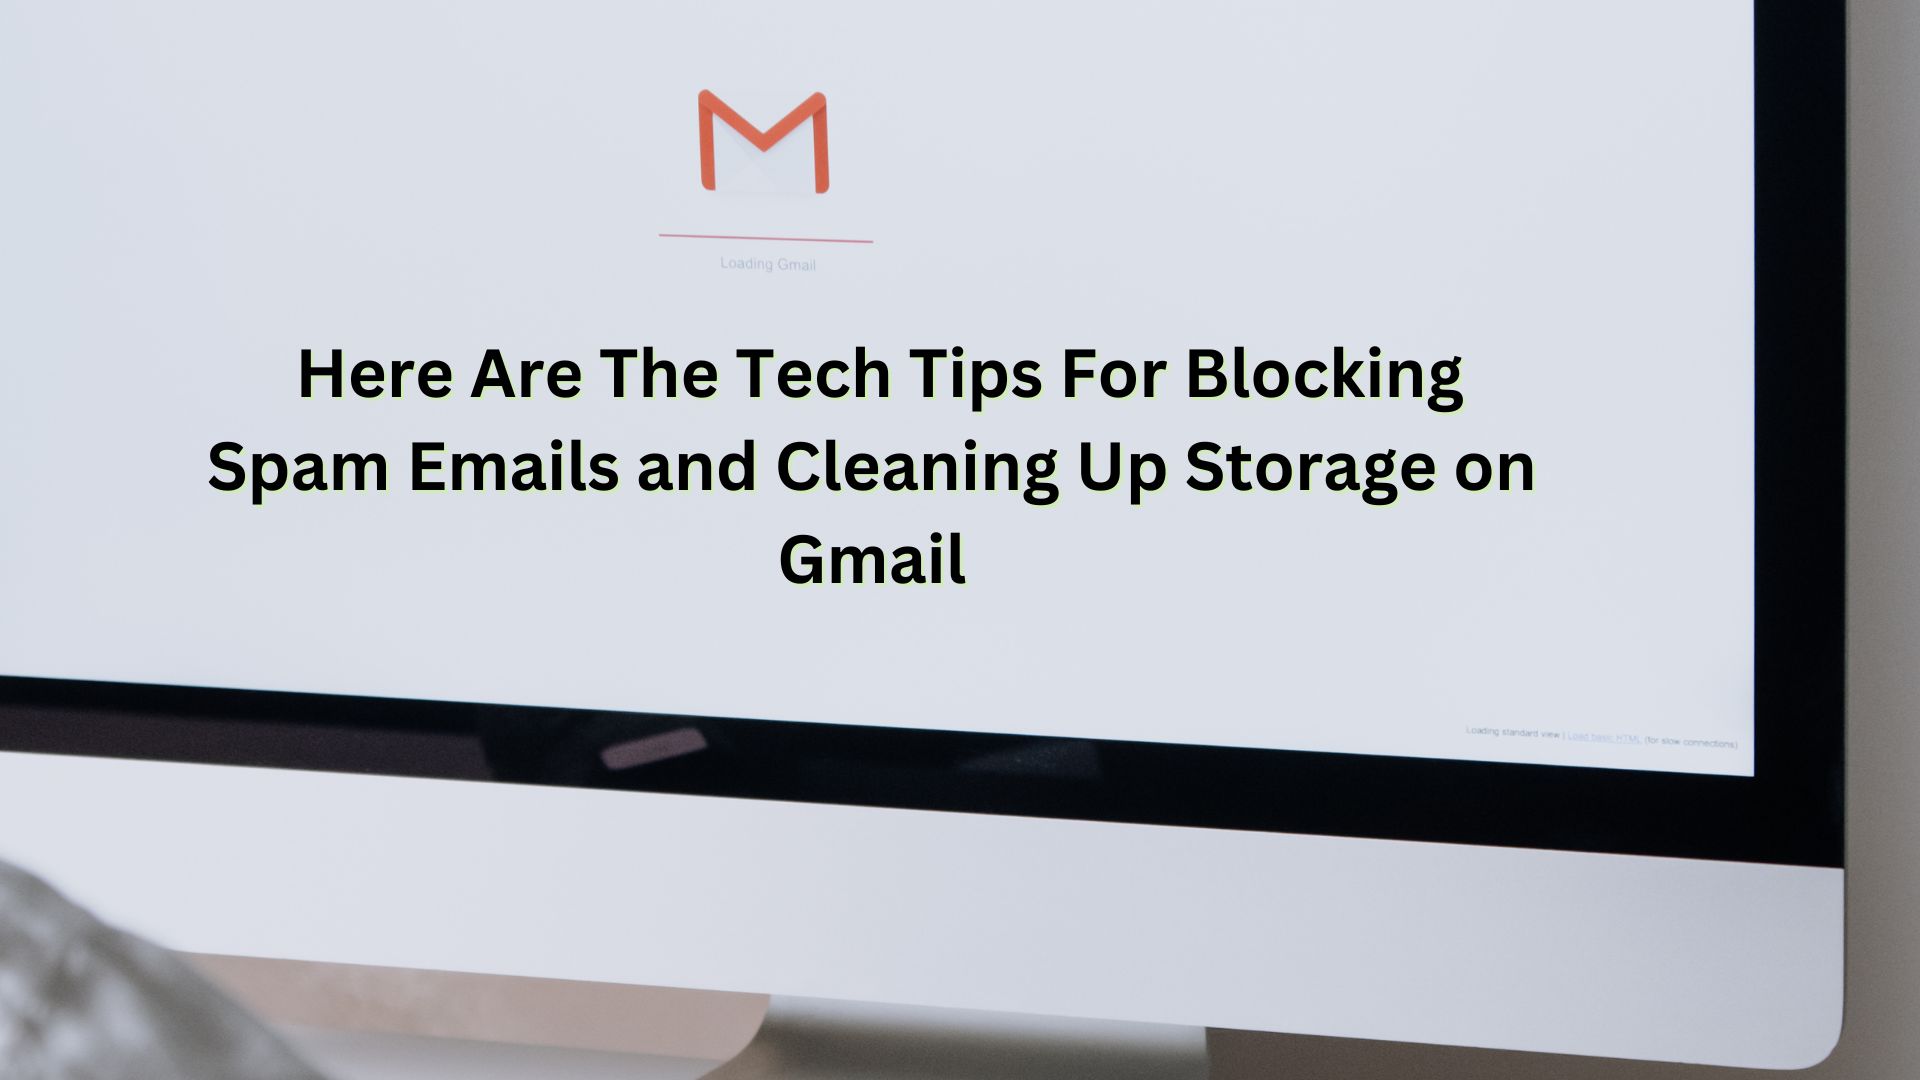 Here Are The Tech Tips For Blocking Spam Emails and Cleaning Up Storage on Gmail